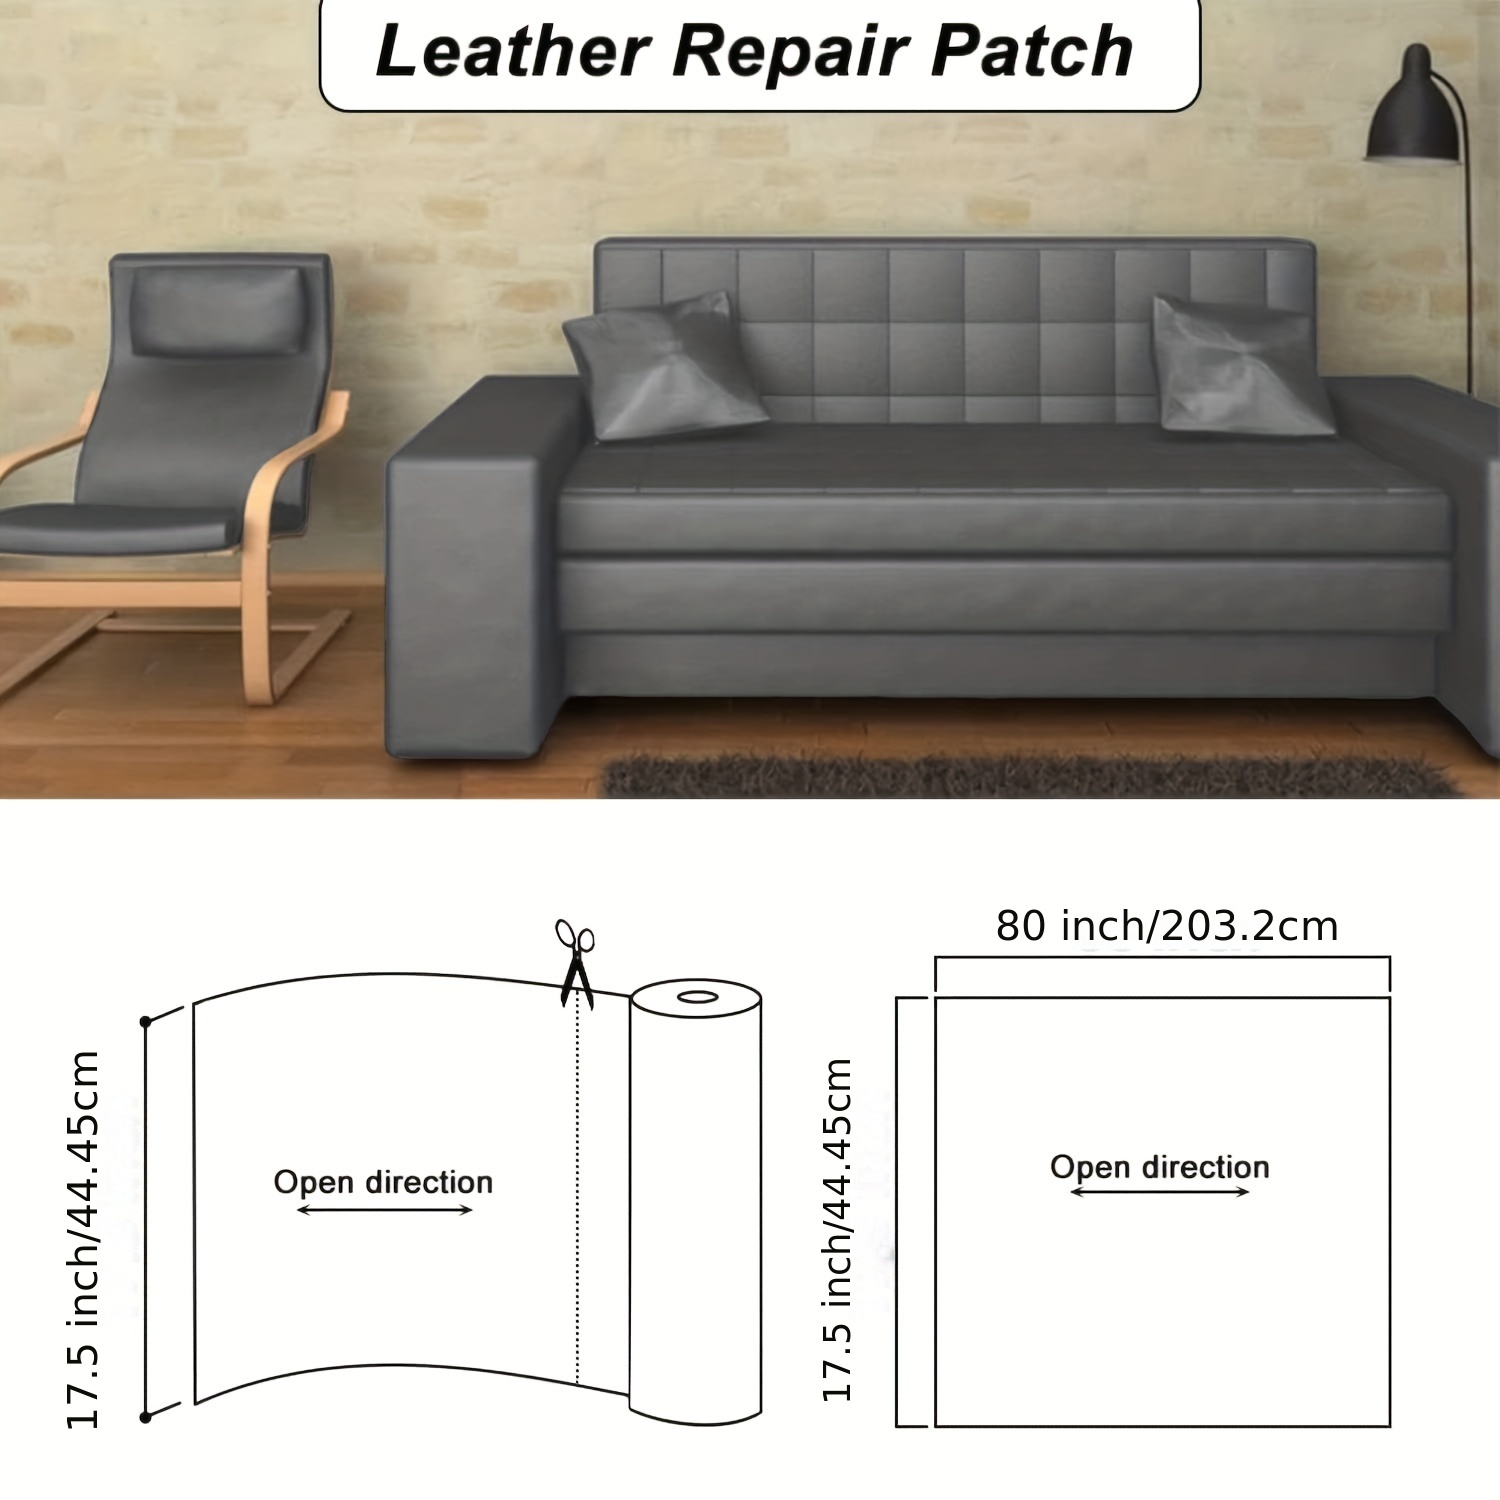 Black Leather Repair Patch,Leather Repair Tape, 4 x 54 inches Leather  Repair Patch for Furniture,Vinyl Repair kit,Leather Couch Patch,for Sofas